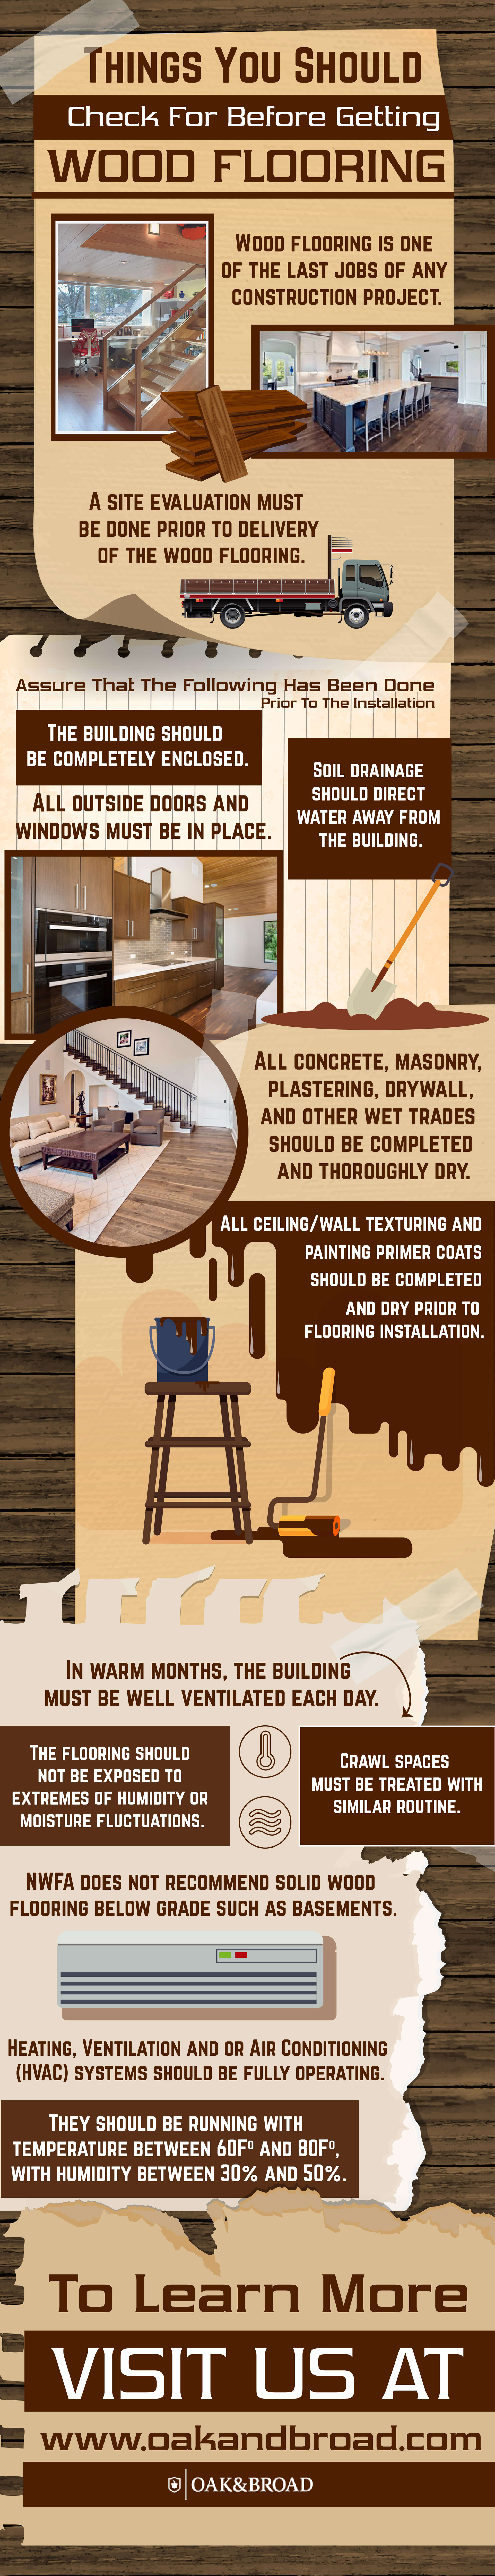 Things You Should Check For Before Getting Wood Flooring